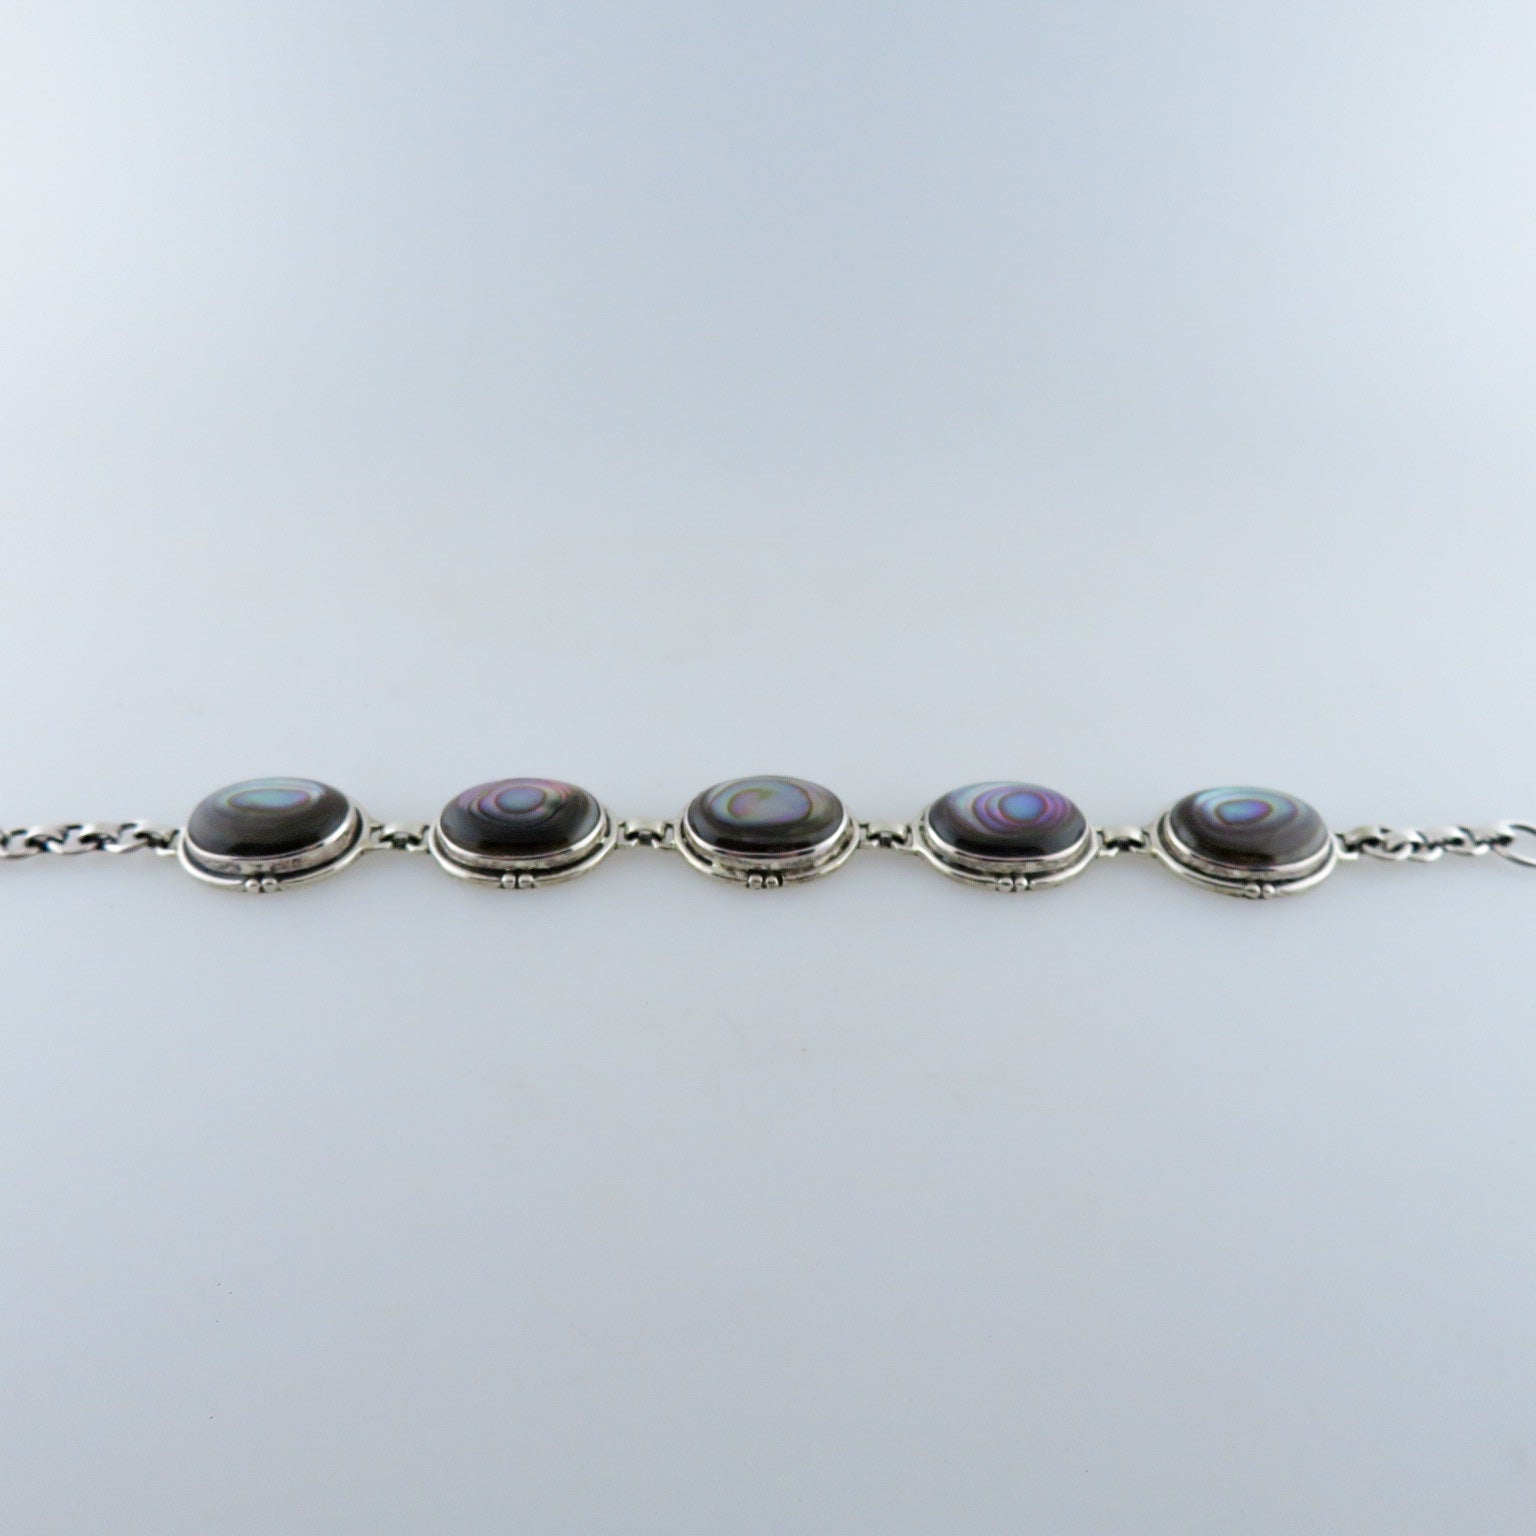 Paua Shell (Rainbow Abalone) Bracelet with Sterling Silver